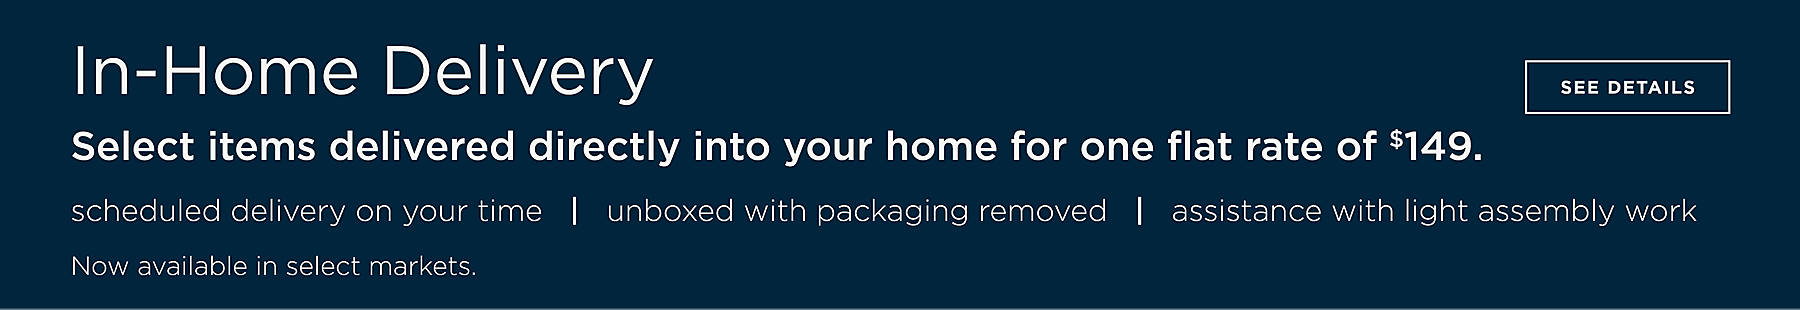 In-Home Delivery Select items delivered directly into your home for one flat rate of $149. Scheduled delivery on your time, unboxed with packaging removed, assistance with light assembly work. Now available in select markets. See Details